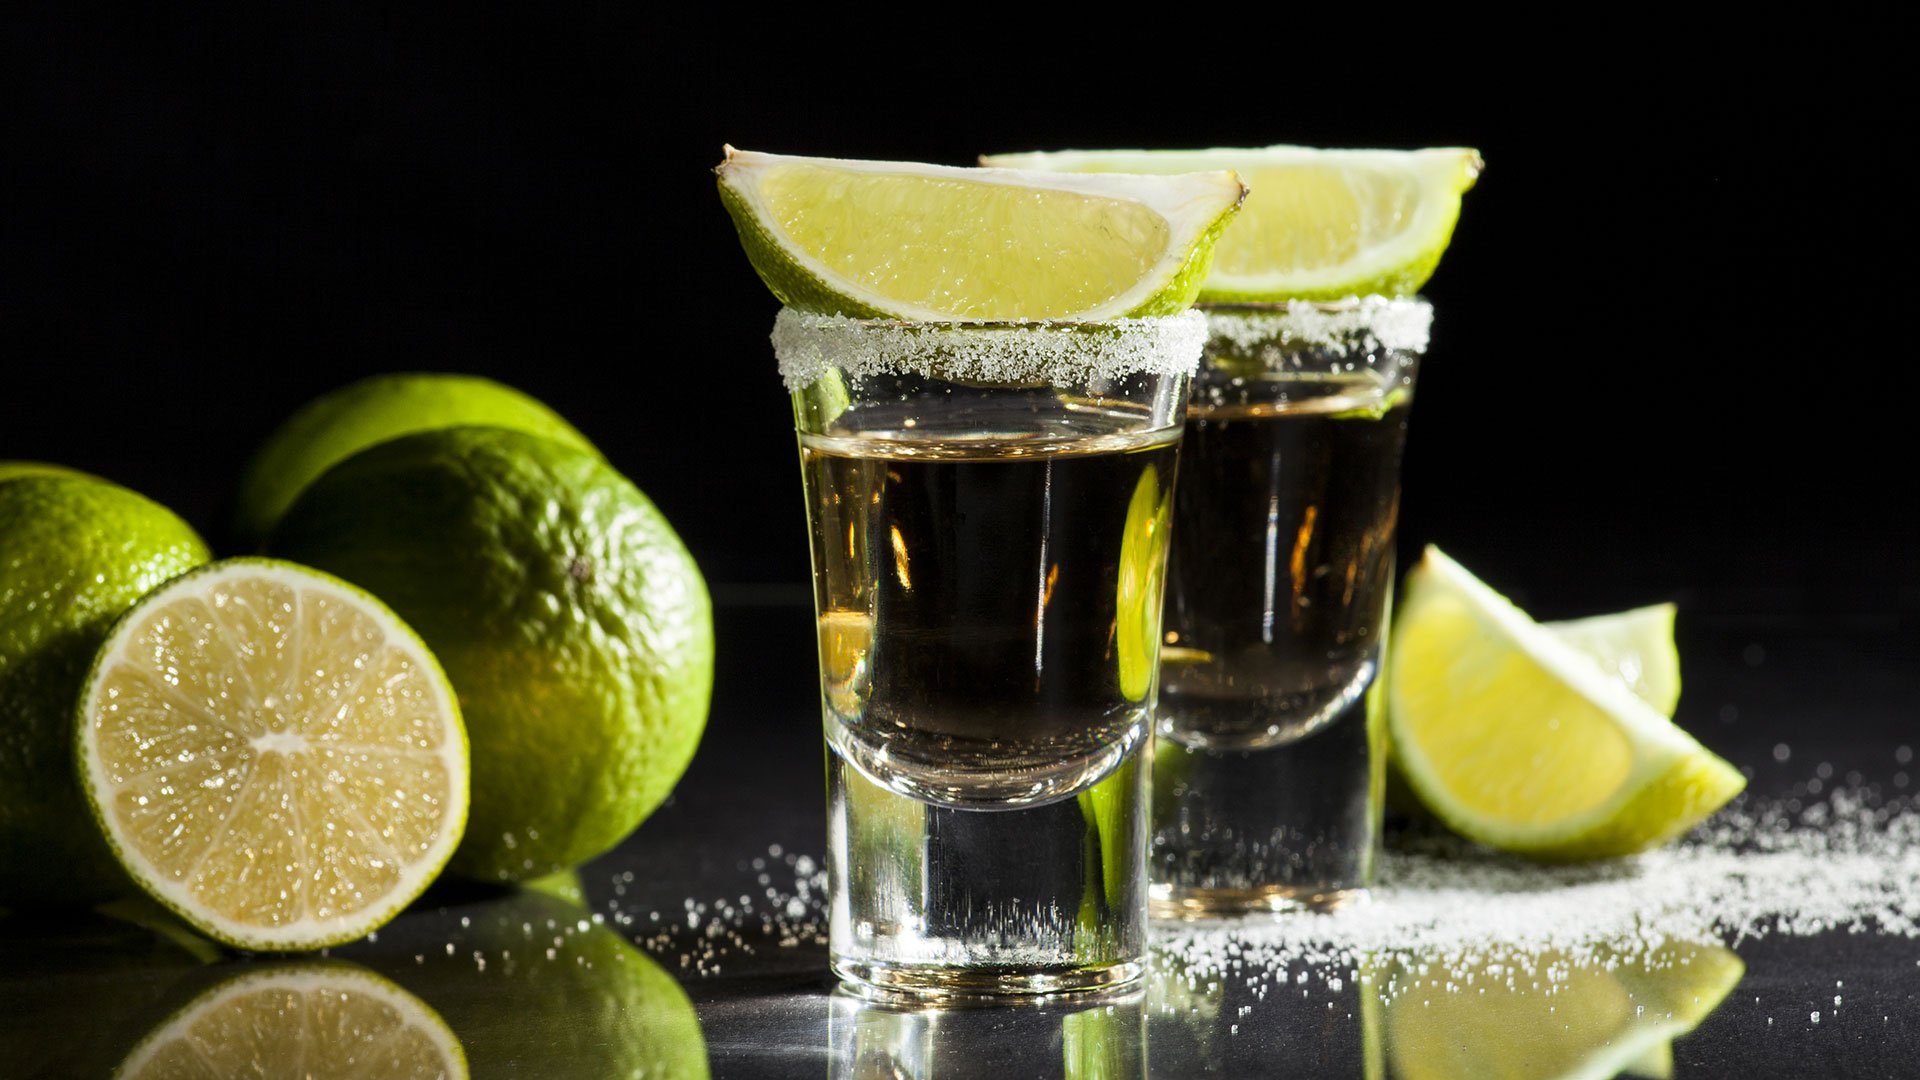 Tequila blanco, lemon and salt best drink for sore throat and cough